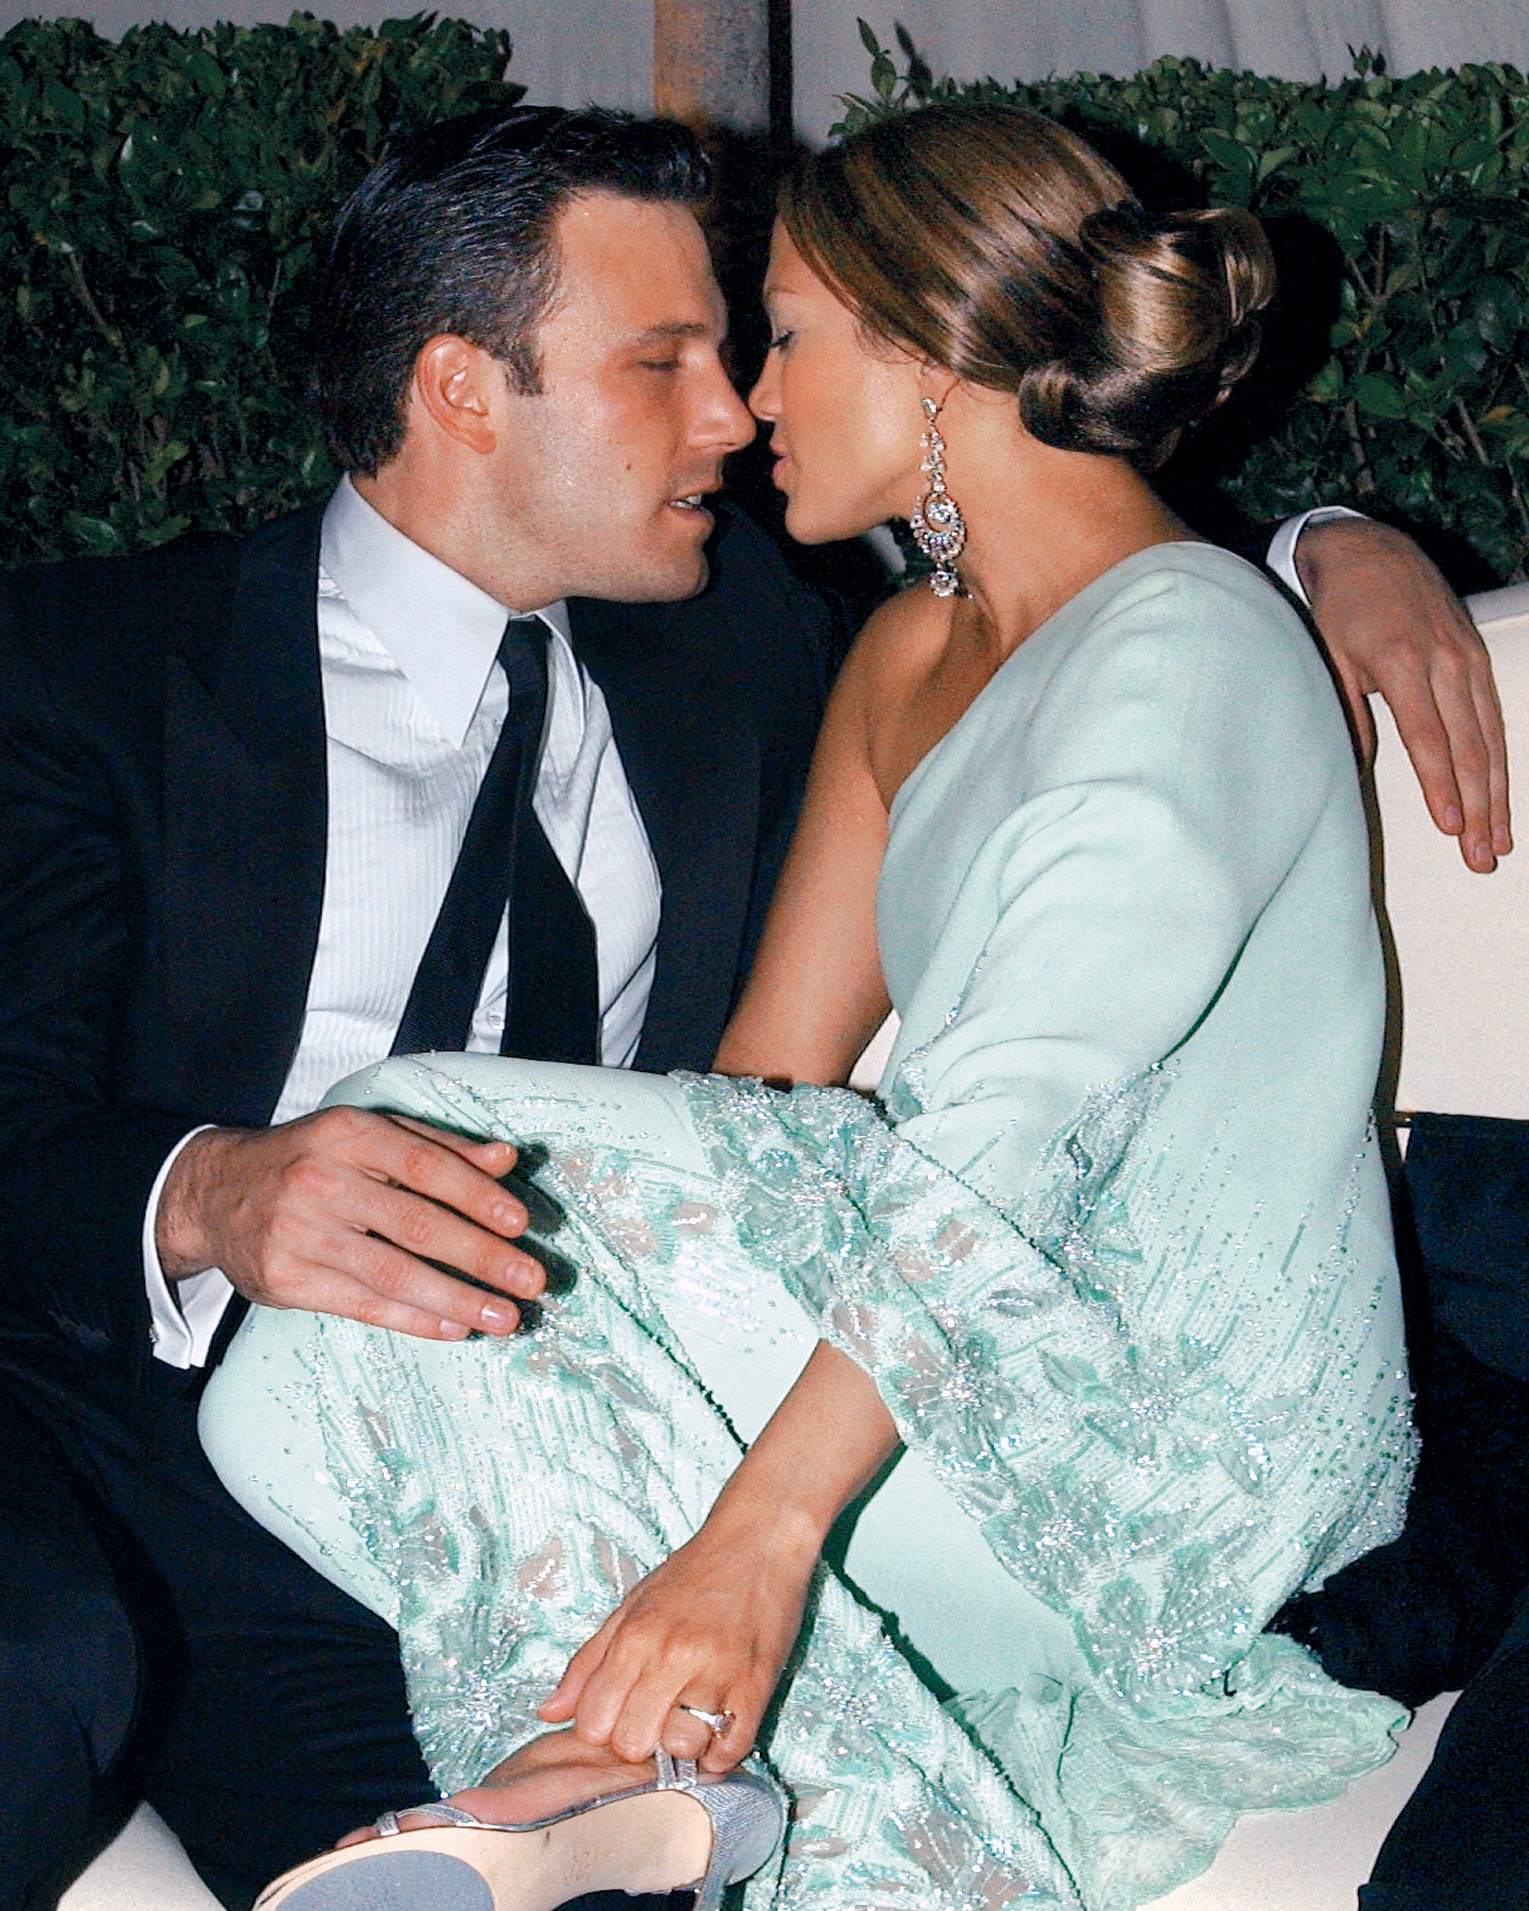 Ben Affleck and Jennifer Lopez at the 'Vanity Fair' Oscars Party Morton's, Beverly Hills, CA in March 23, 2003. (Patrick McMullan—Getty Images)